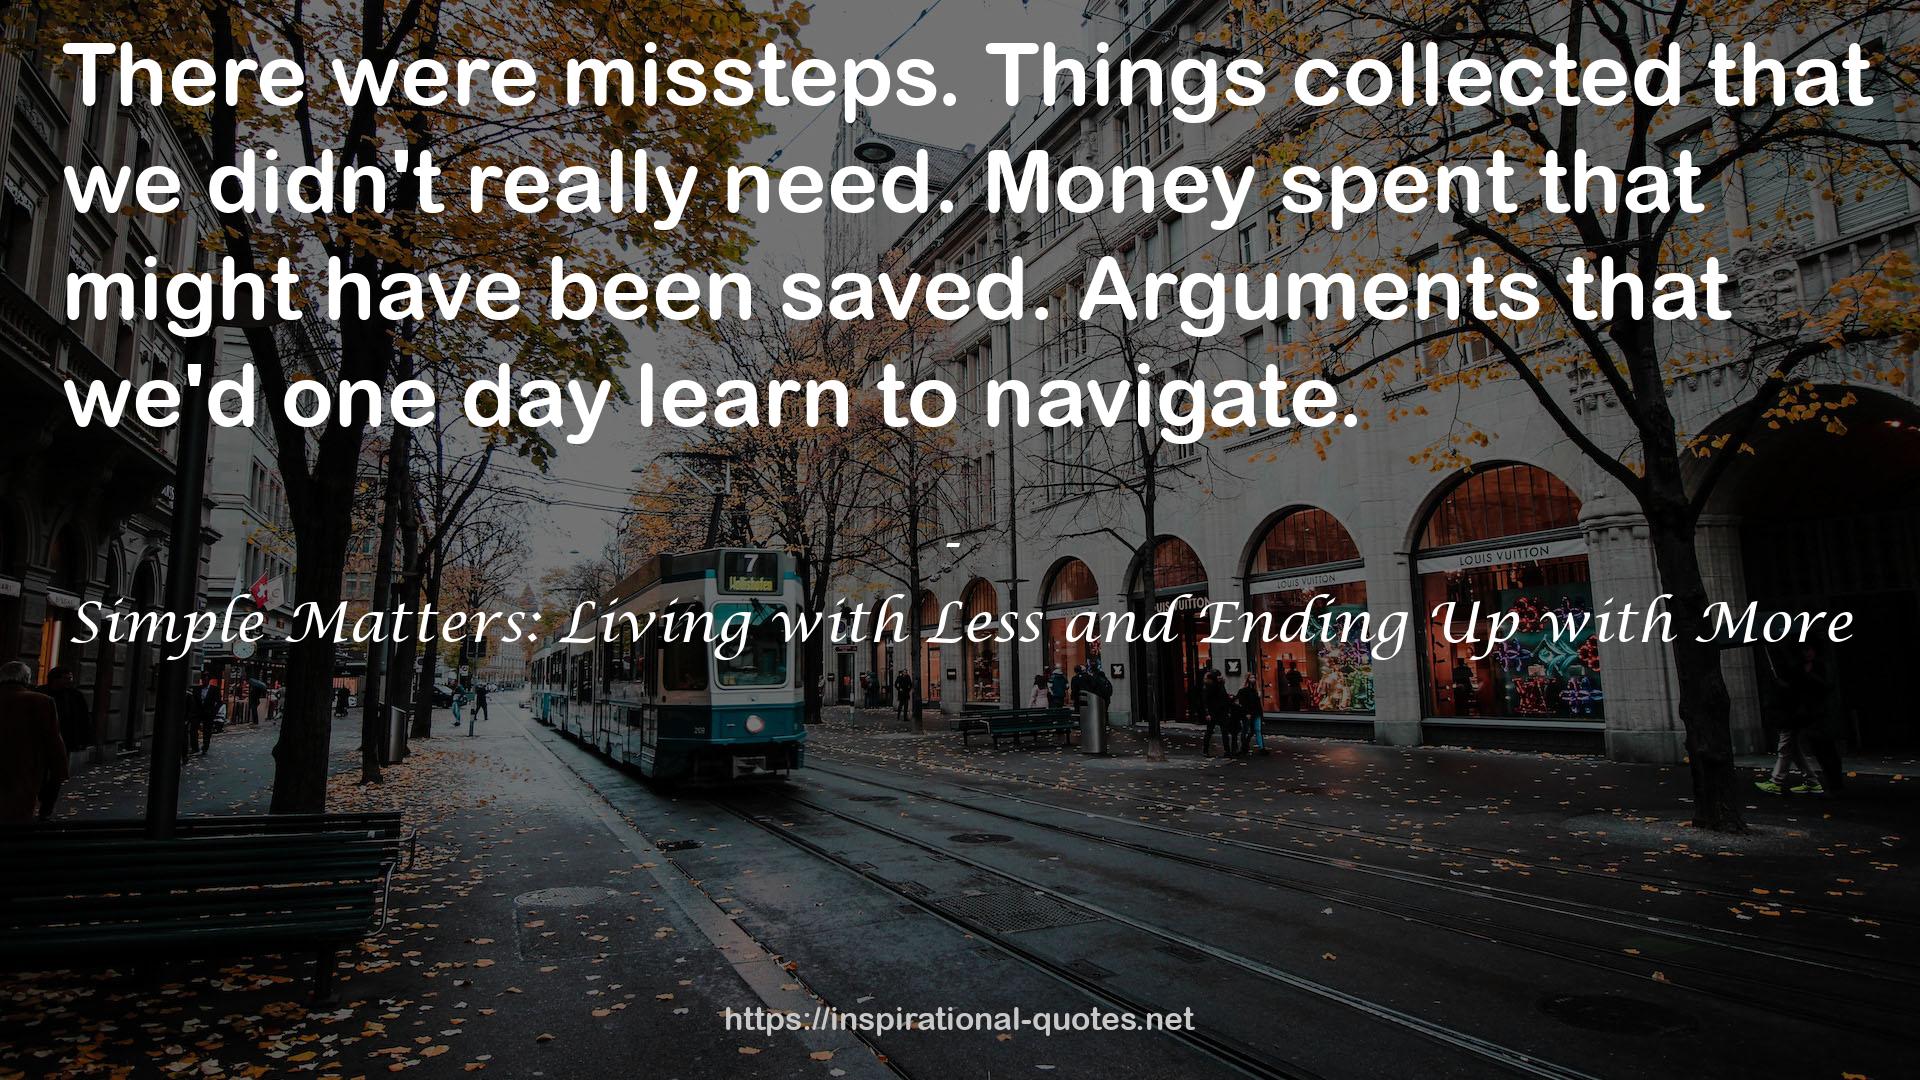 Simple Matters: Living with Less and Ending Up with More QUOTES